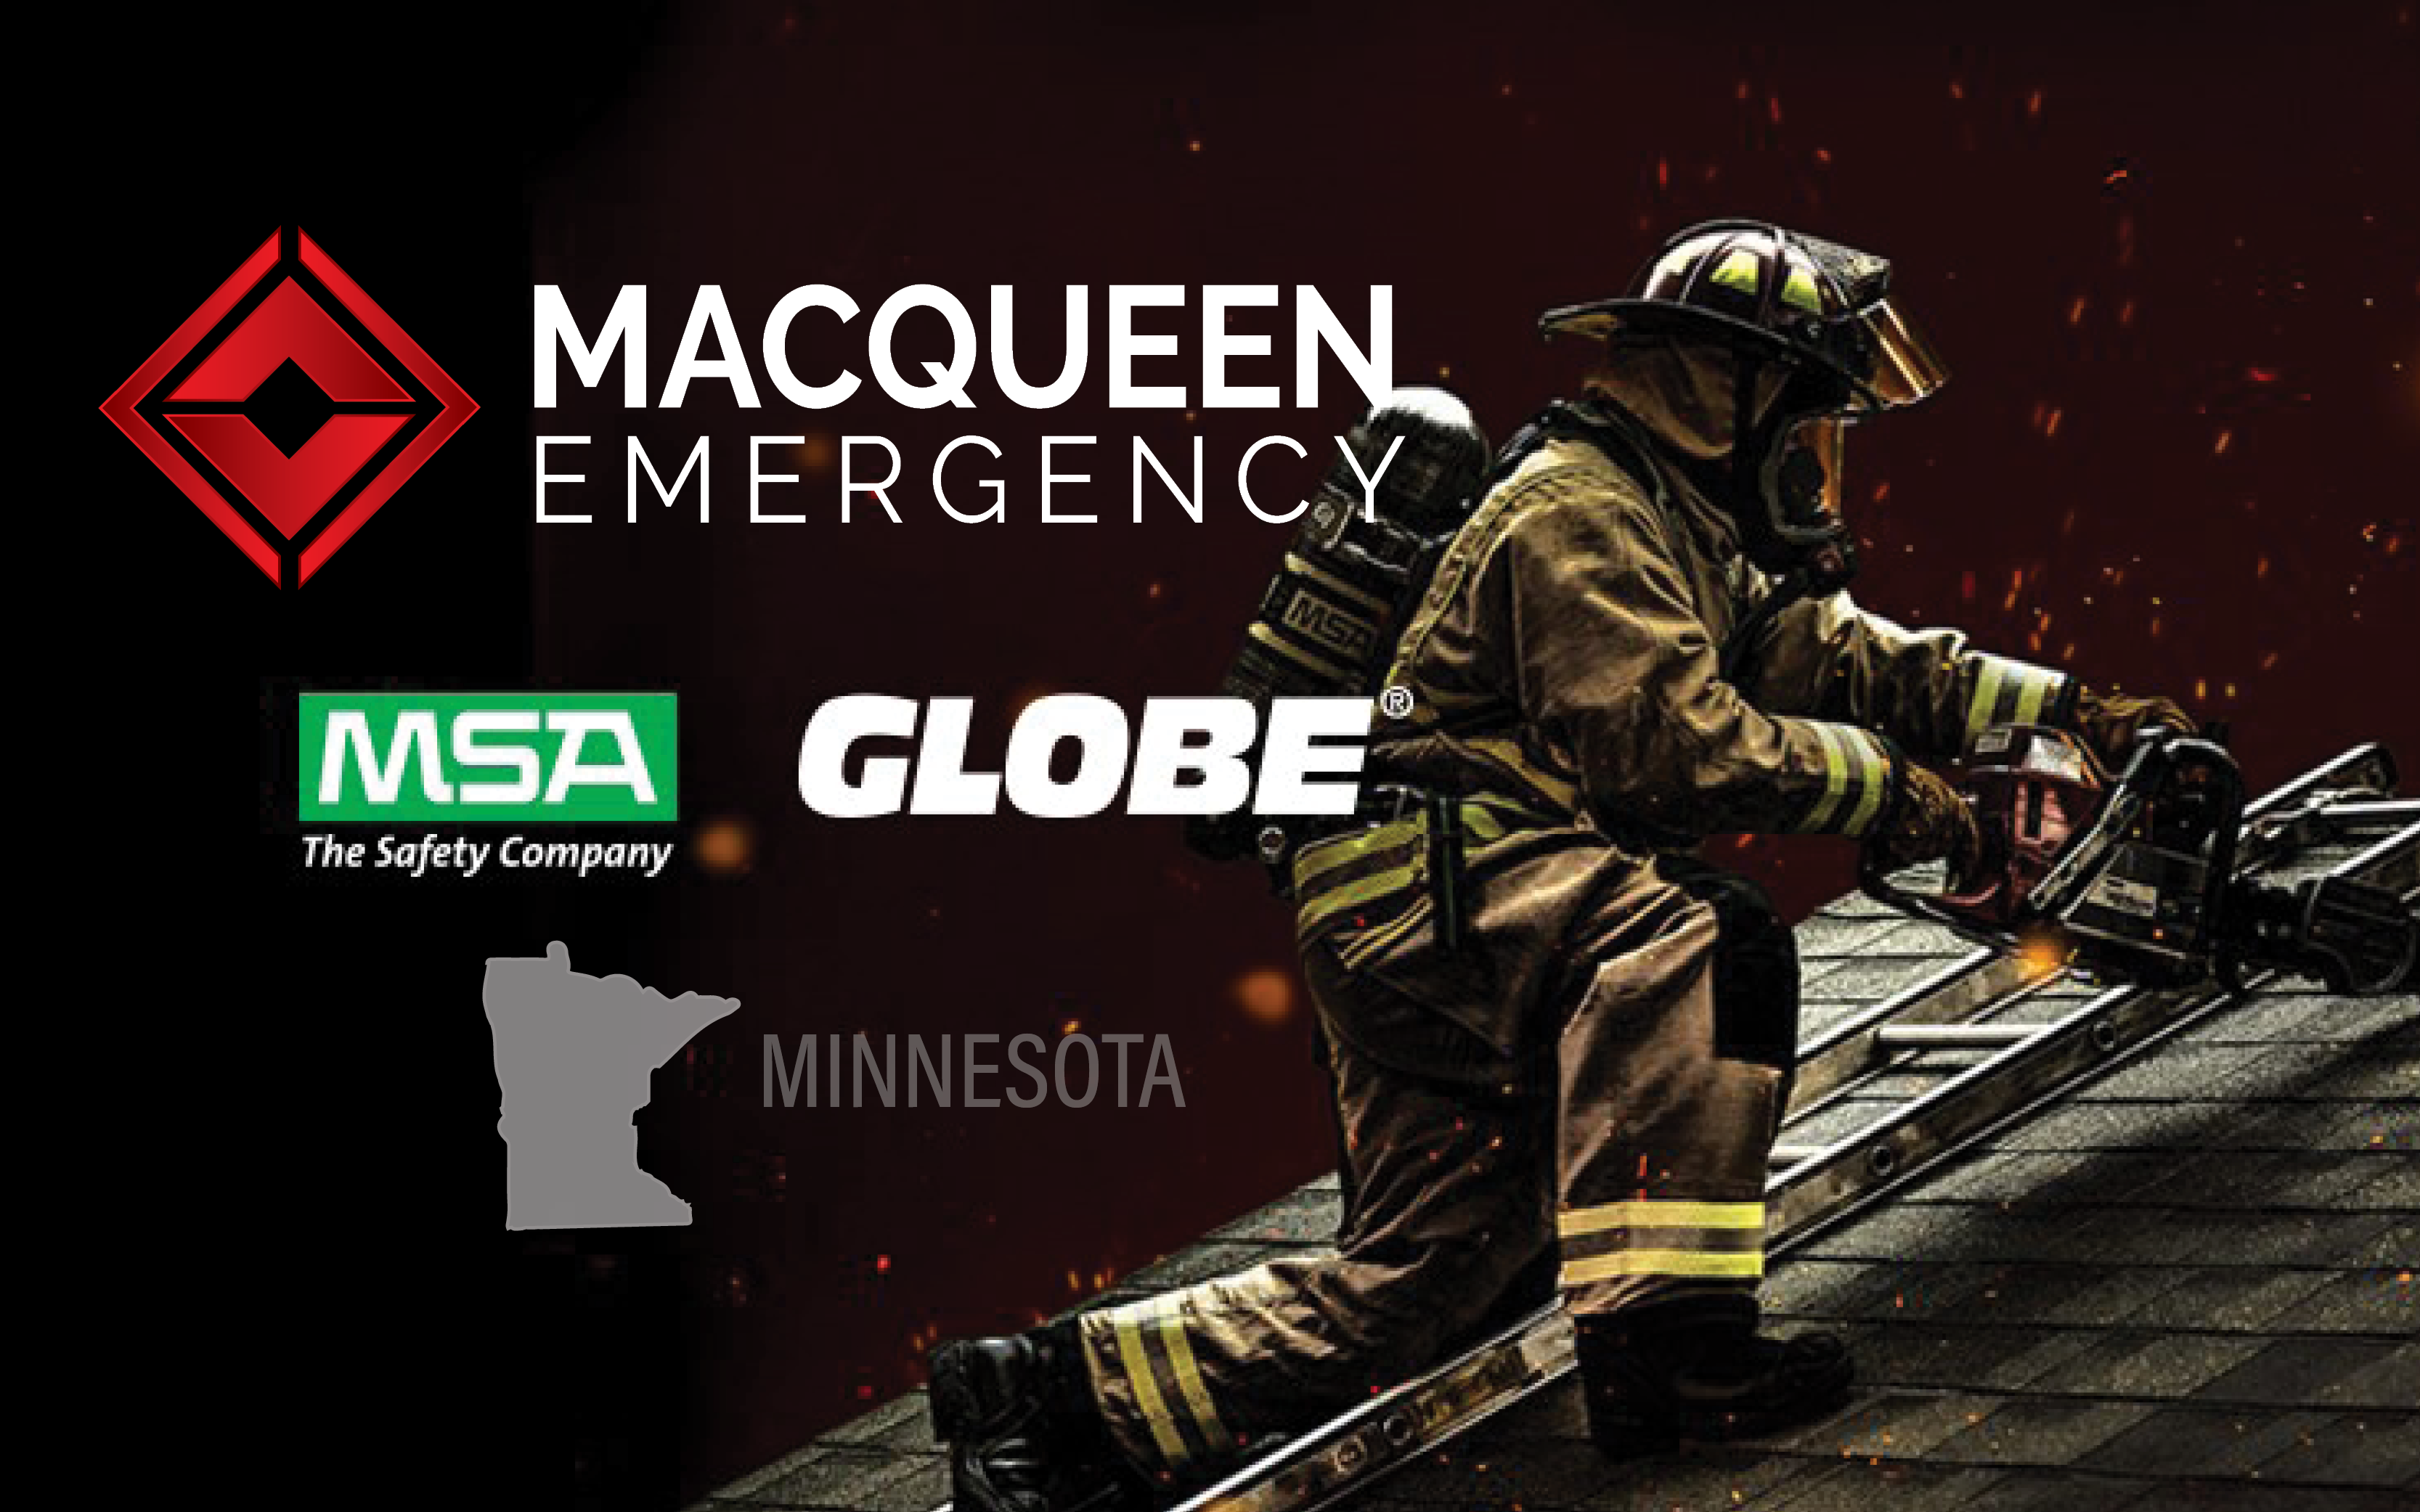 MacQueen Emergency Now Offers MSA and Globe Products in Minnesota